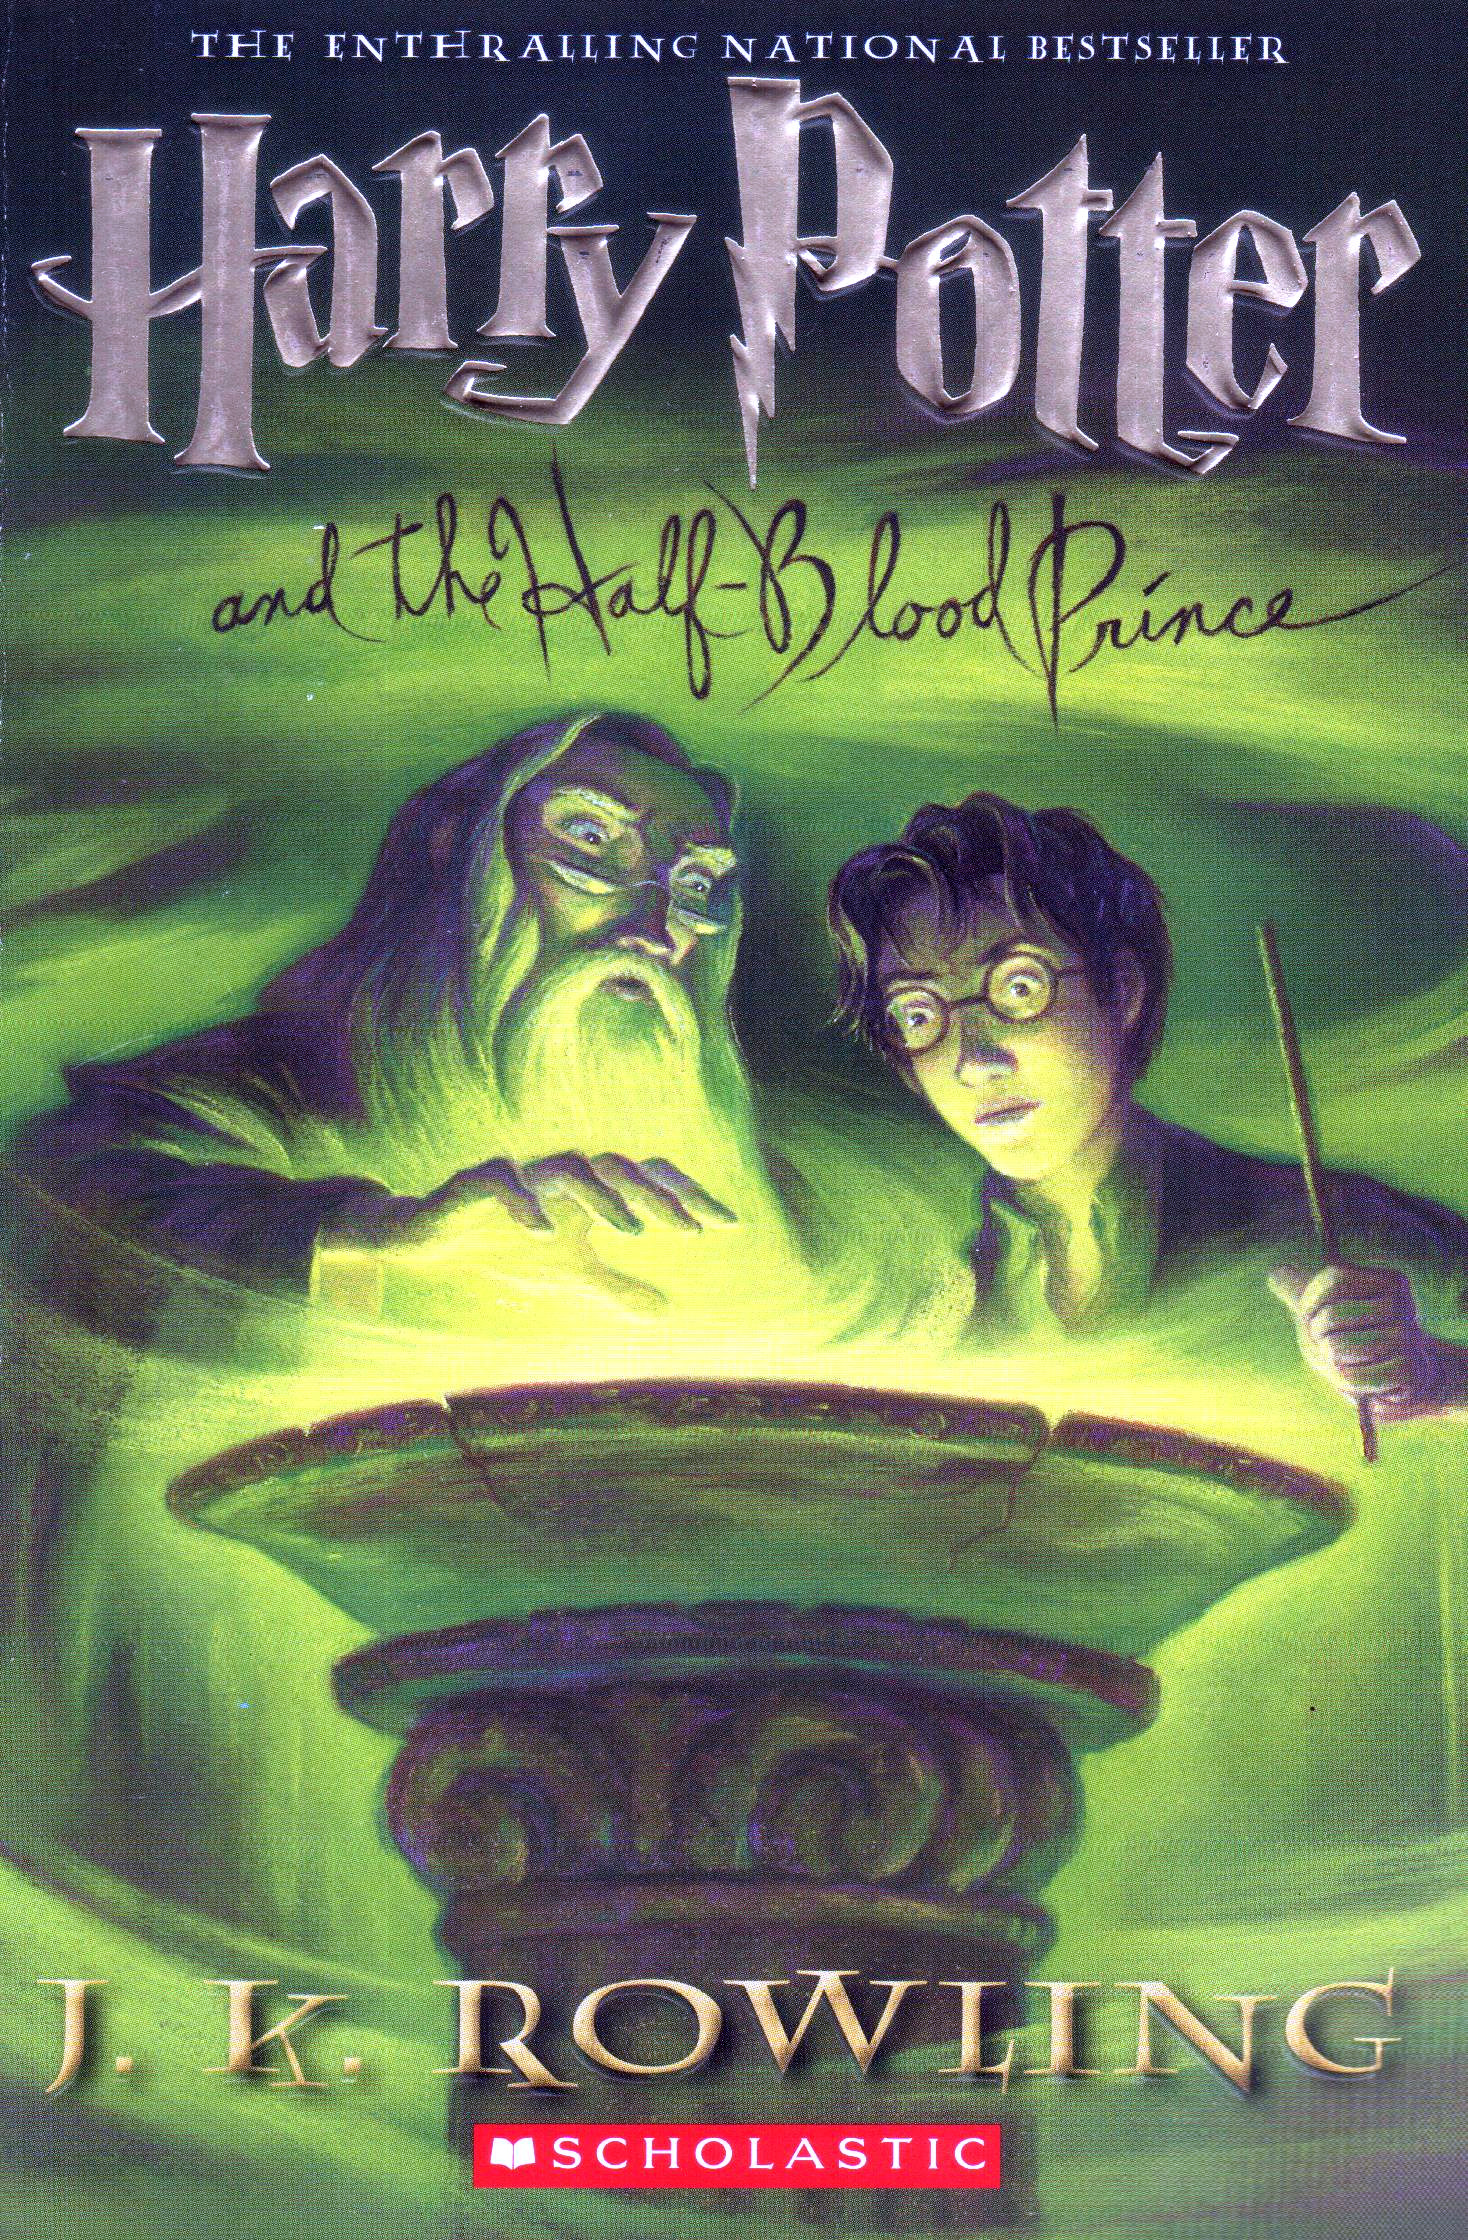 Harry Potter (6) and the Half-Blood Prince